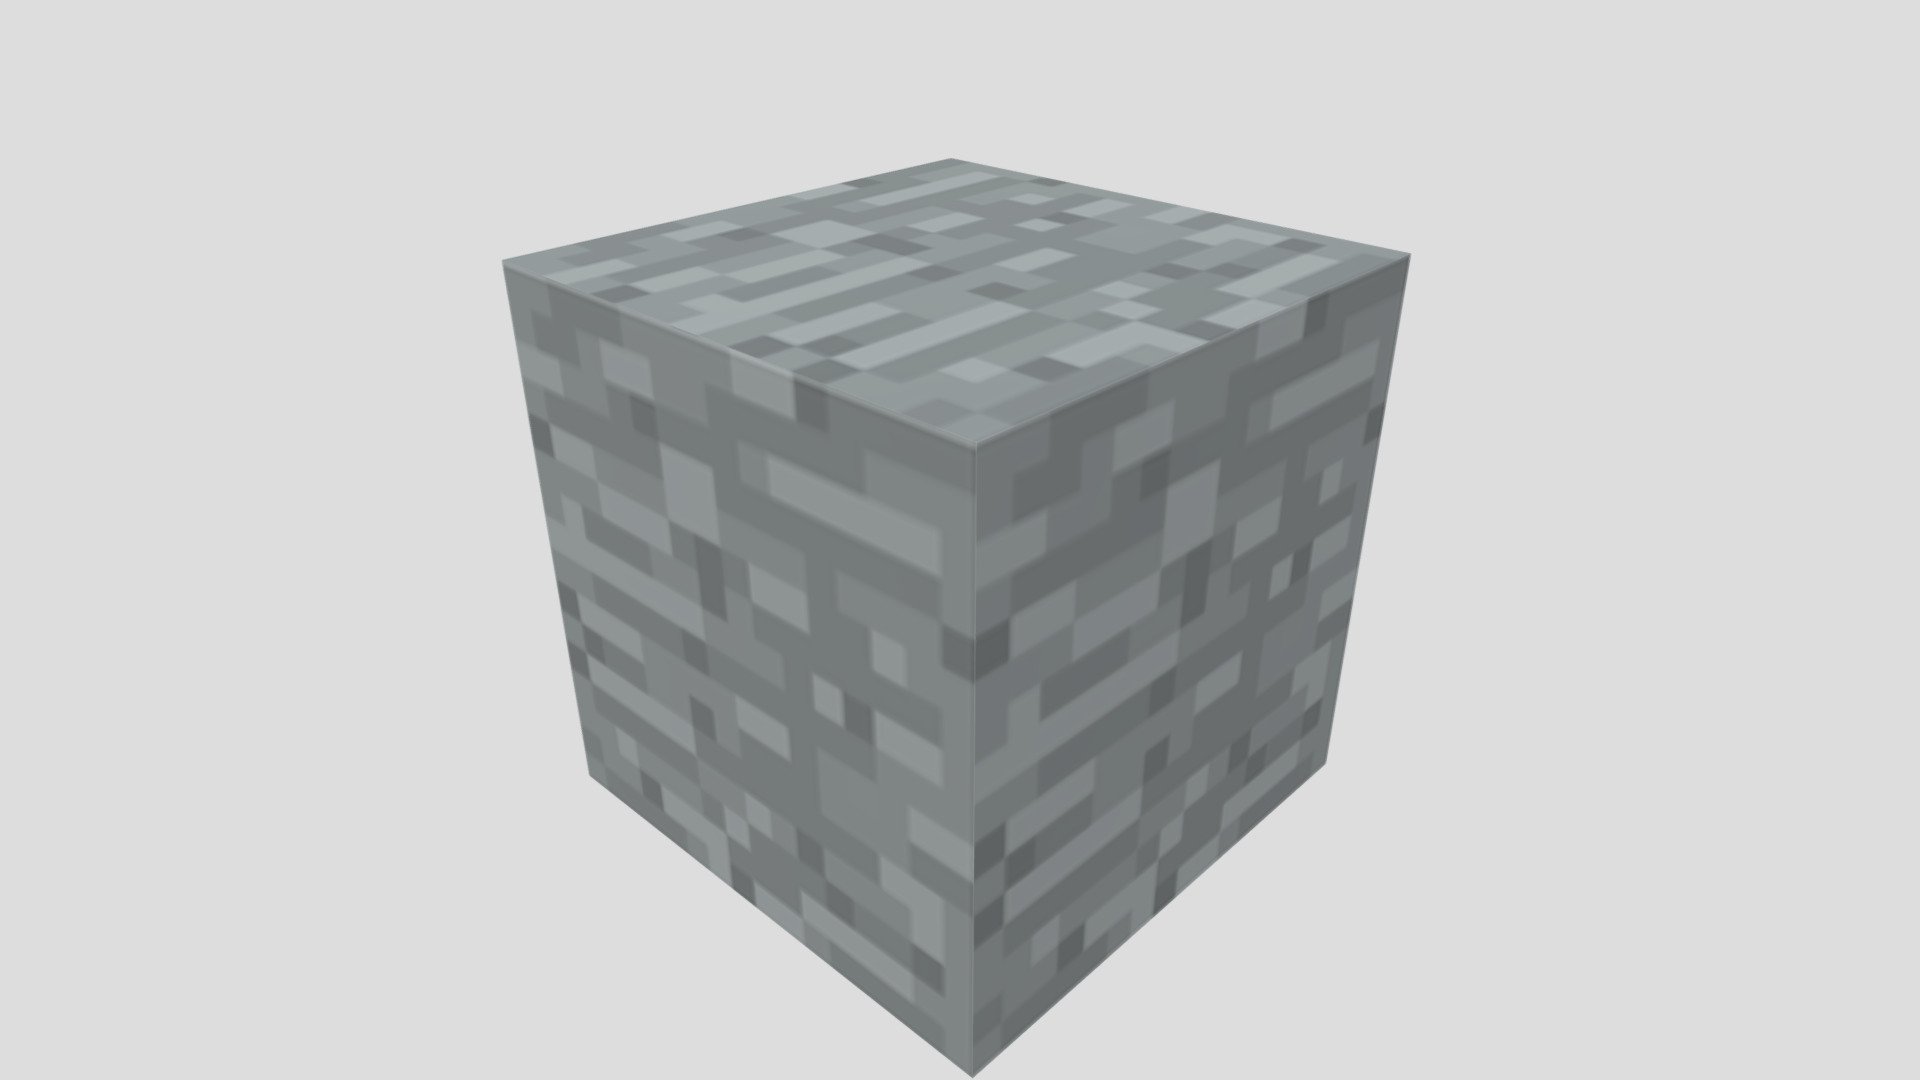 Minecraft Stone Block Download Free 3d Model By Momo Momo Ernst 3678d5f